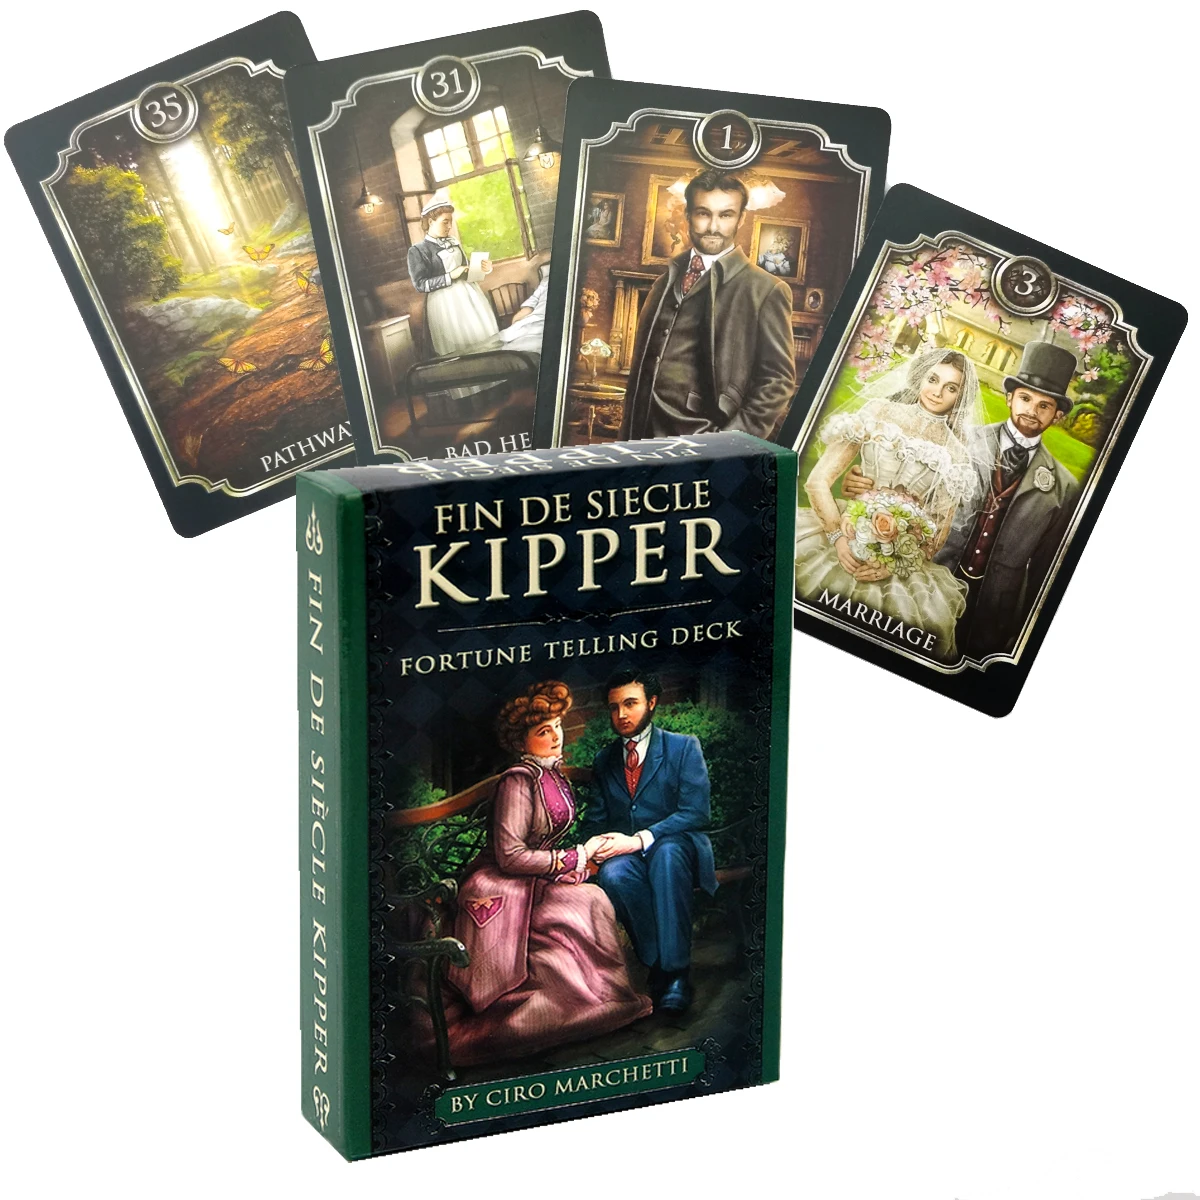 

FIN Sieve Kipper By Ciro Marchetti Tarot Cards English Version Divination Fate Deck Oracle Board Games Party Toy Entertainment